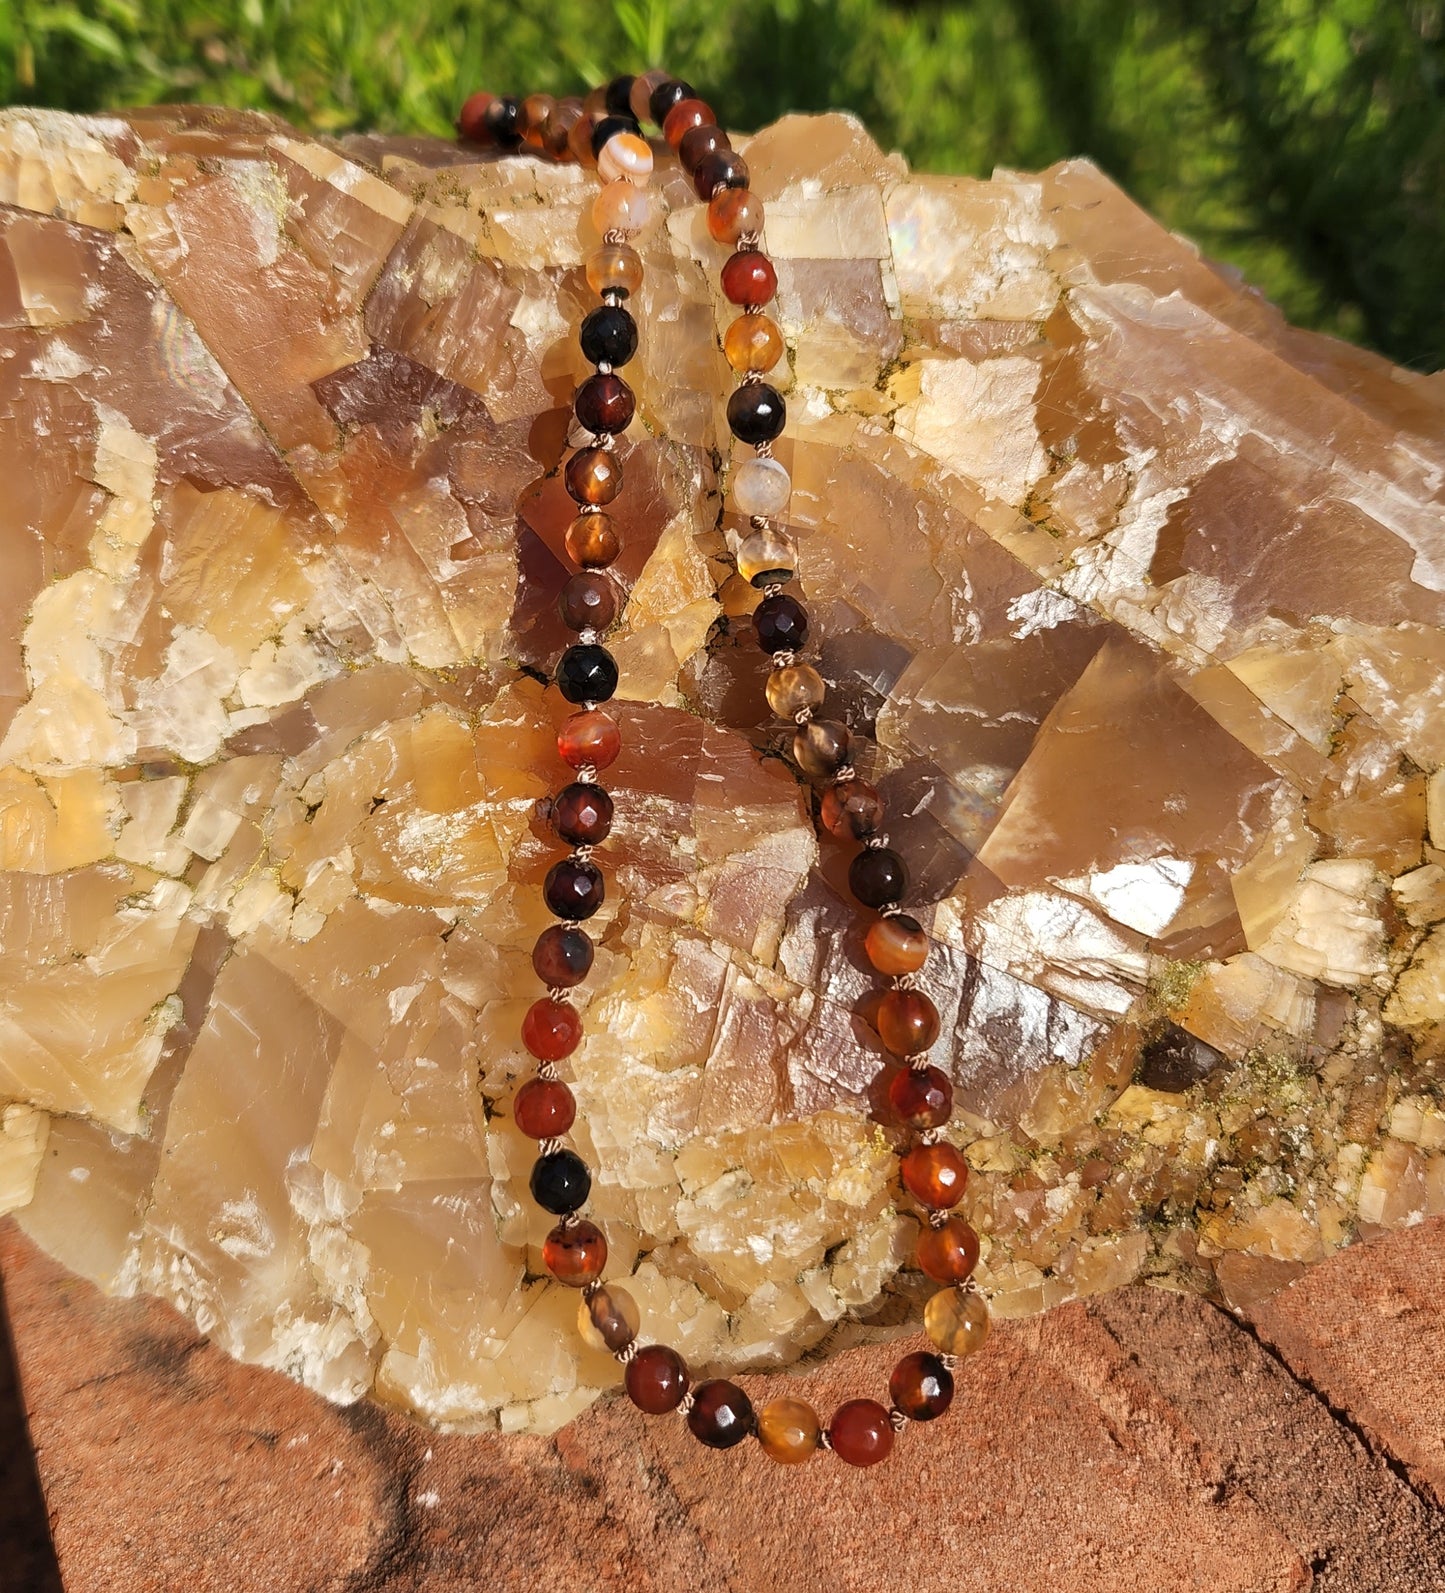 Brazilian Fire Agate Knotted 16.5" Strand with 14K Clasp, Candy Gemstone Necklace